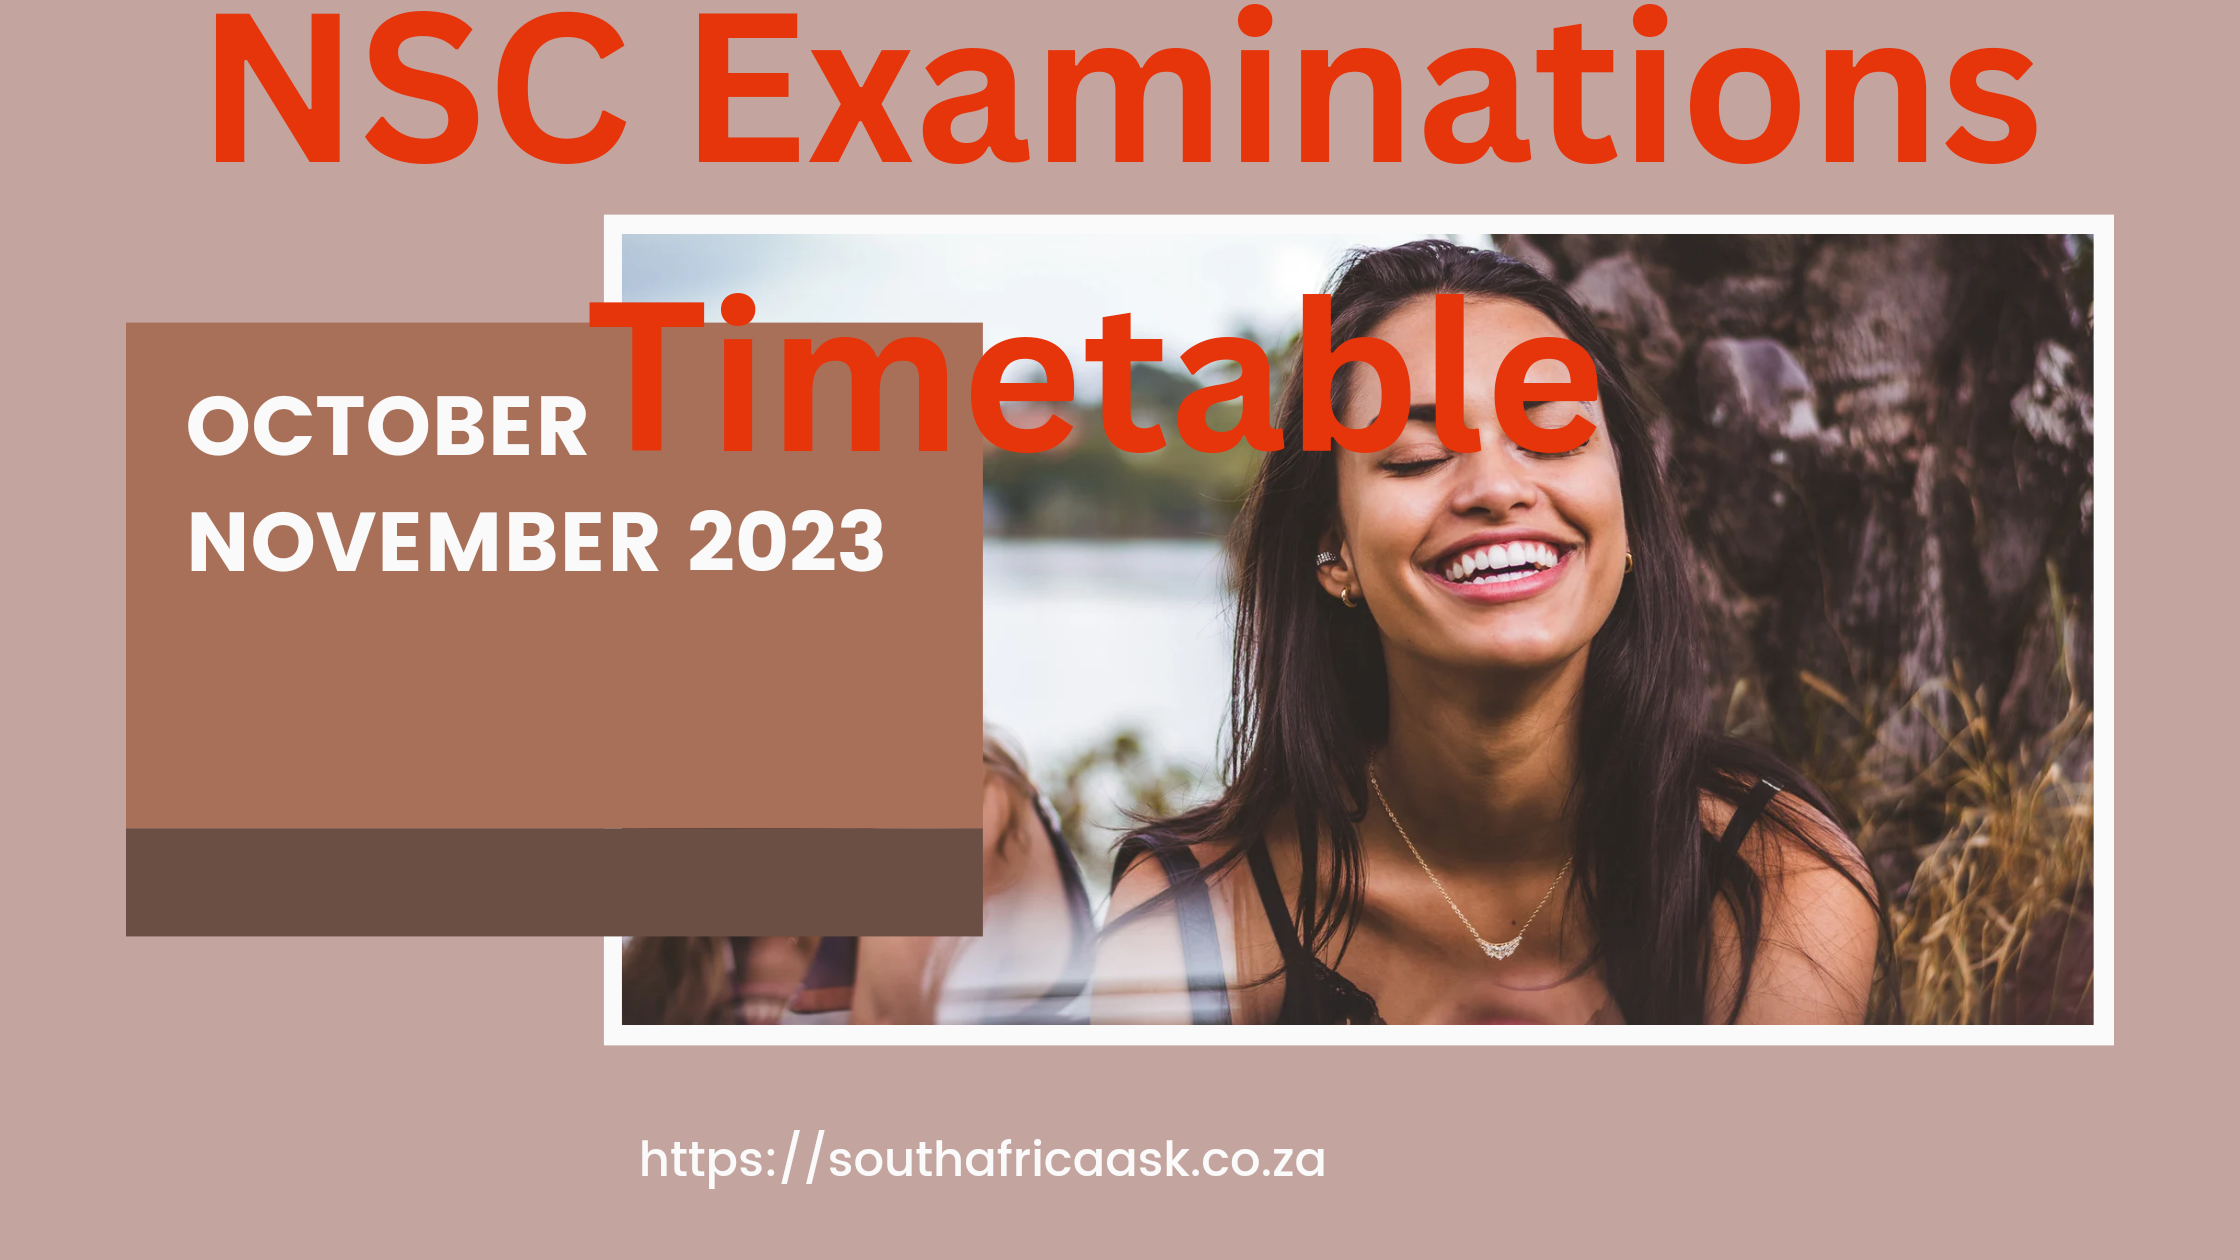 NSC Examinations Timetable for October November 2023